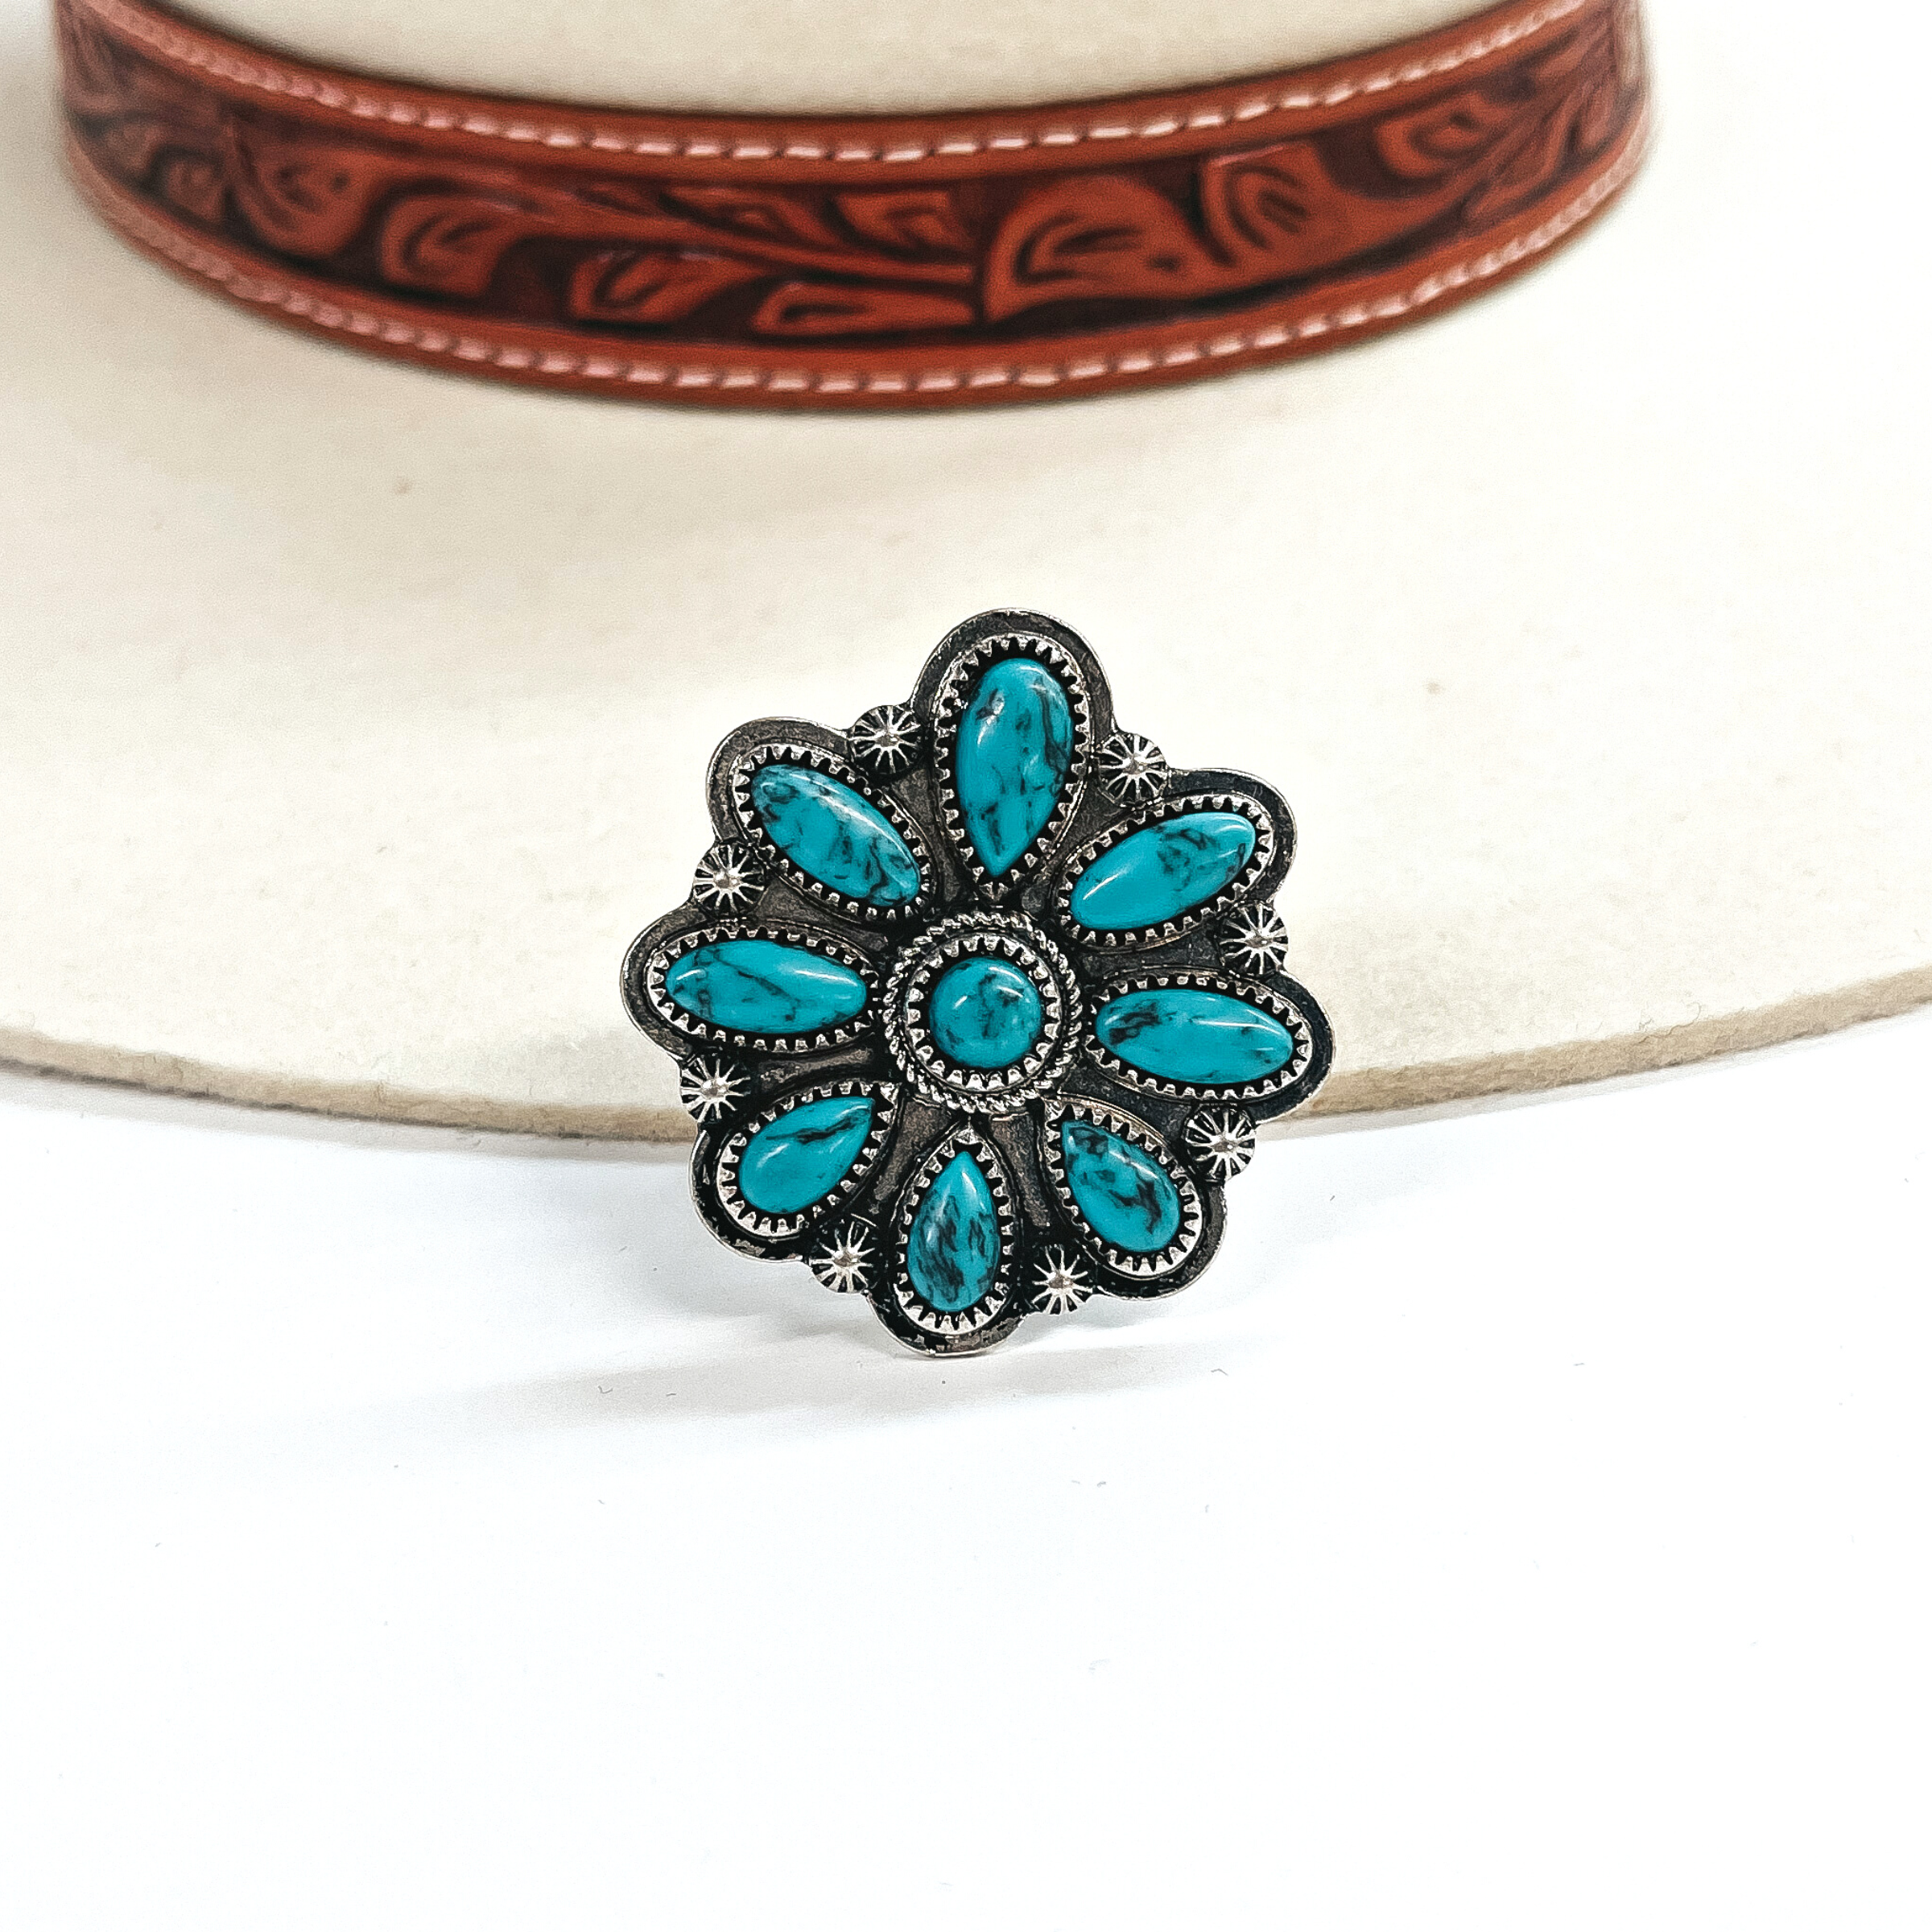 This a siver western flower with small turquoise stones in the petal setting.  This ring is taken on an ivory felt hat  with a brown textured band and on a white background.